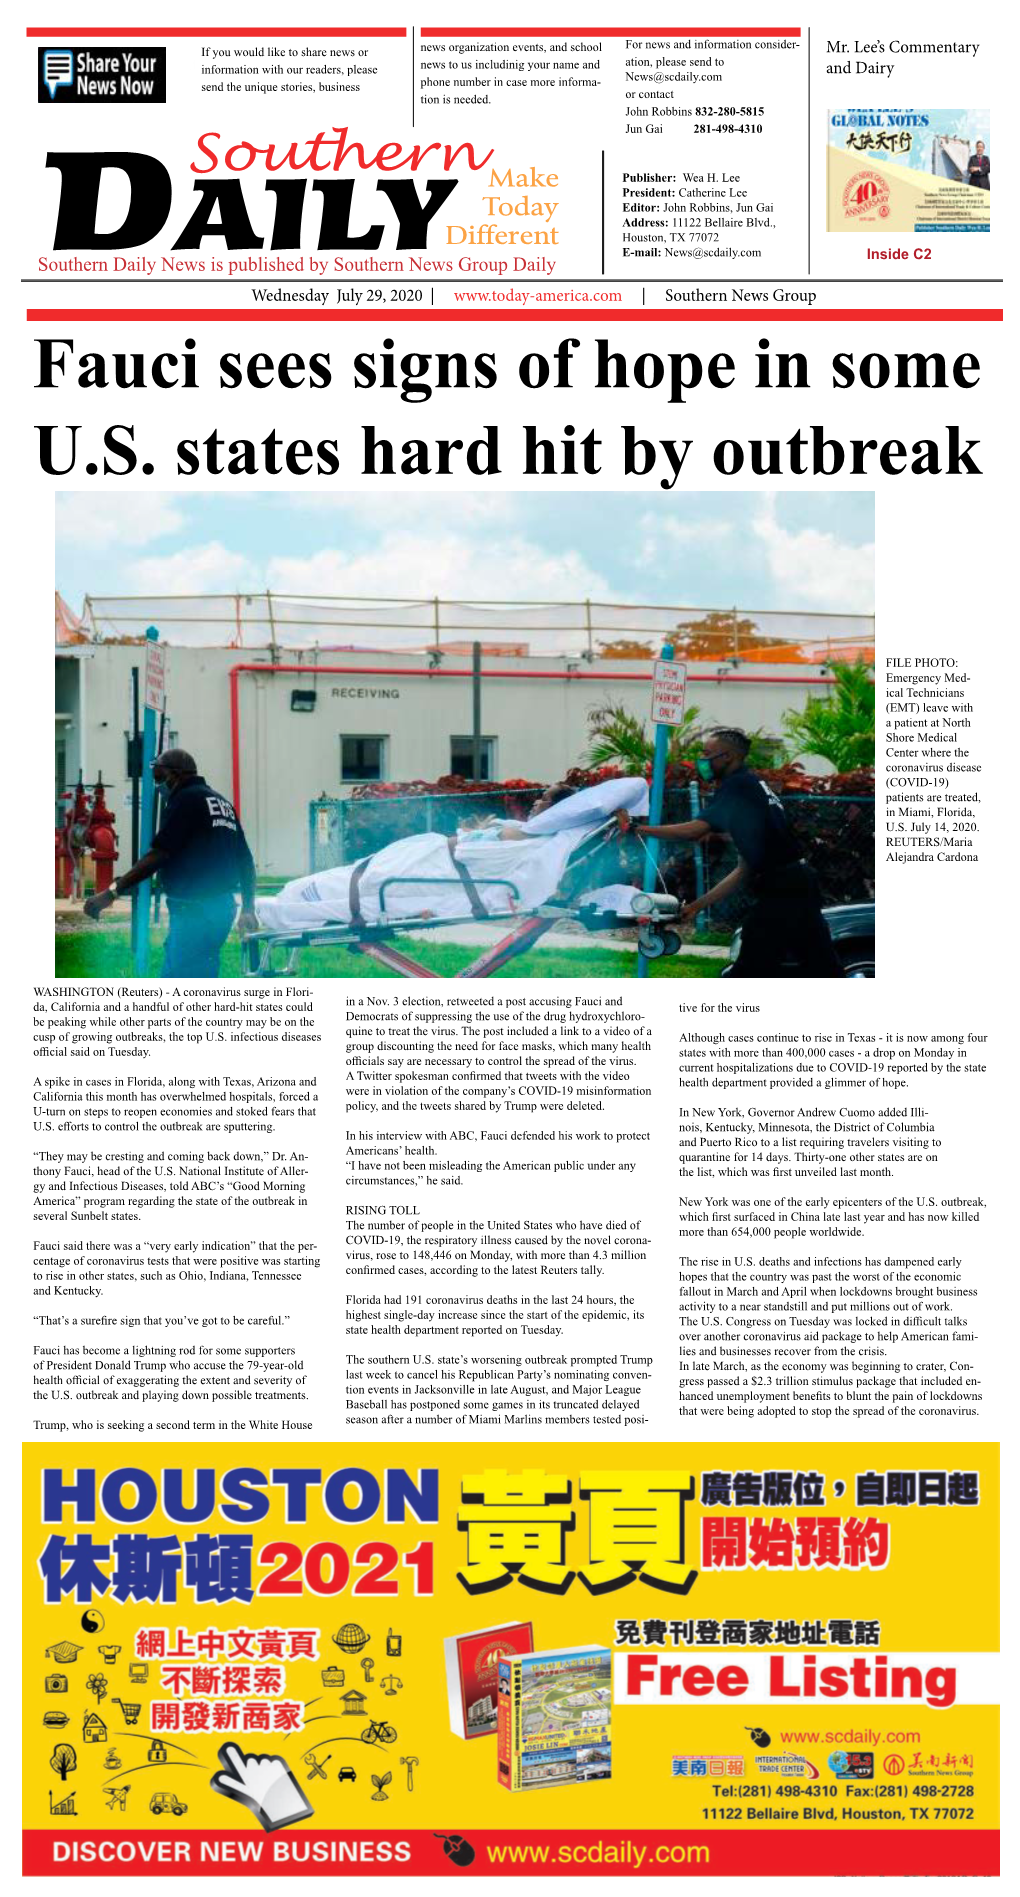 Fauci Sees Signs of Hope in Some U.S. States Hard Hit by Outbreak